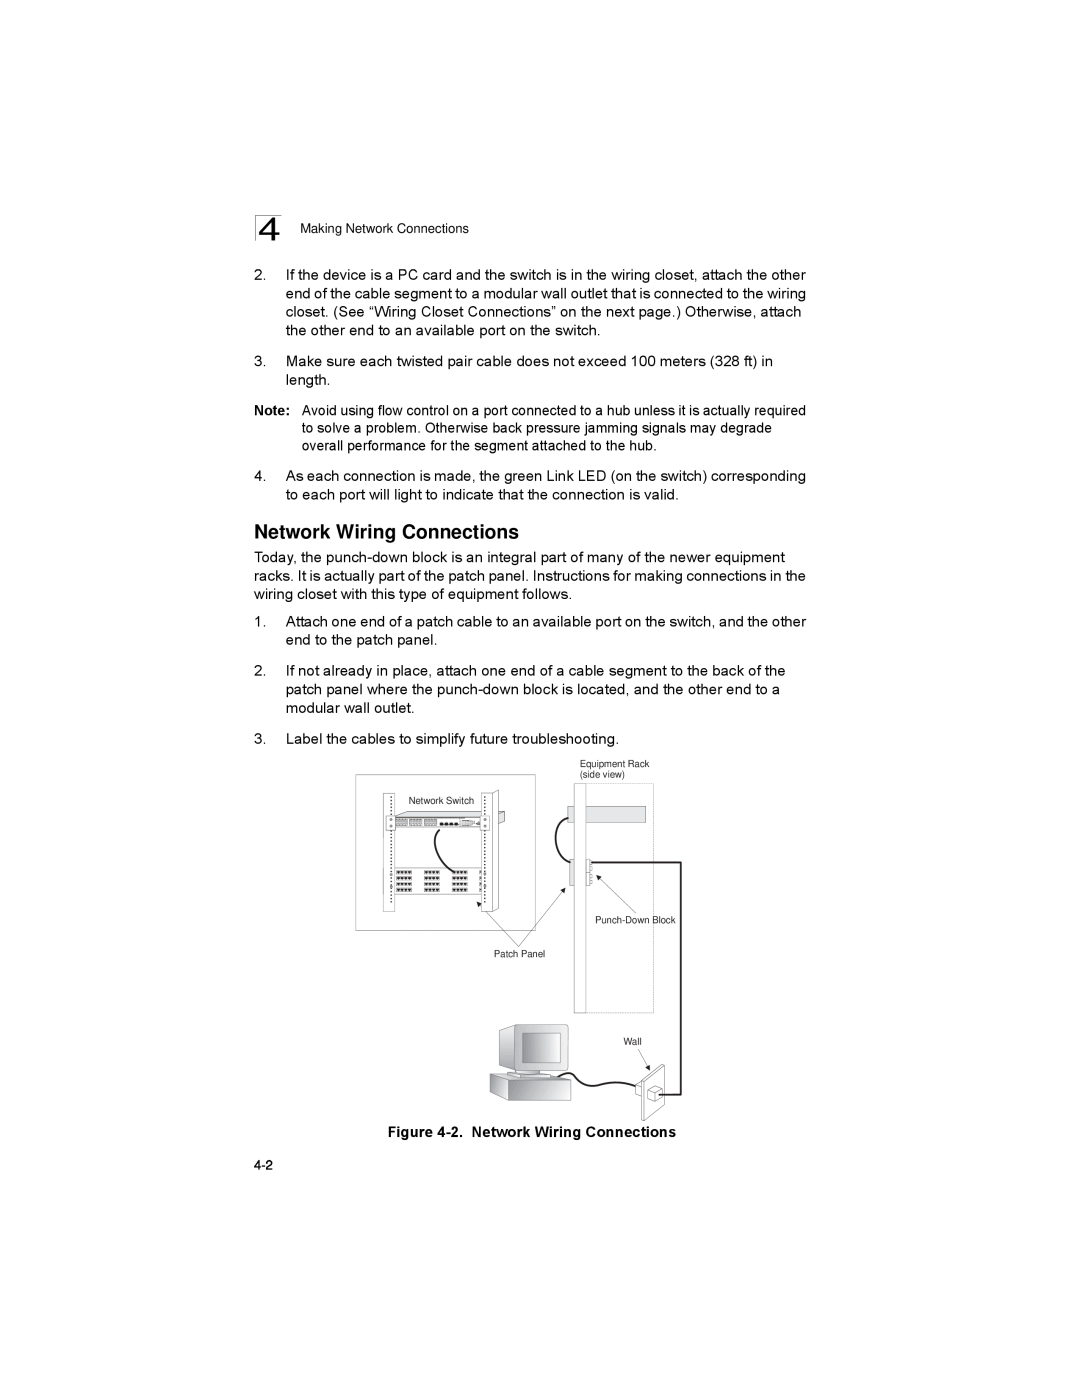 Alcatel-Lucent 6300-24 manual 2. Network Wiring Connections 